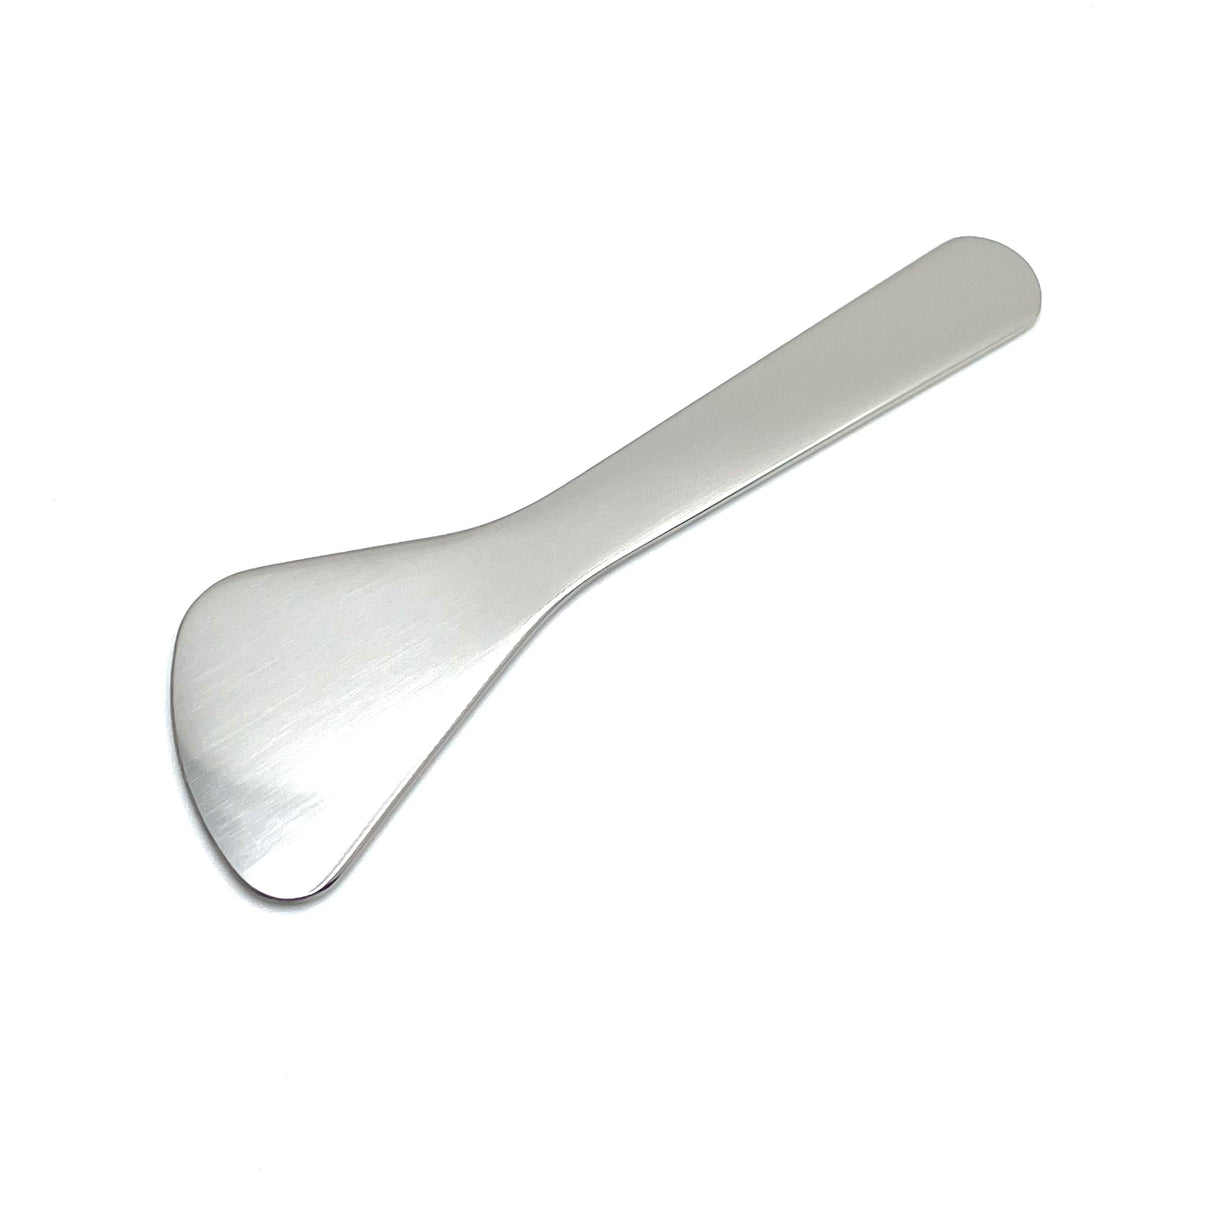 TRC - Stainless Steel Soap Scoop Spatula